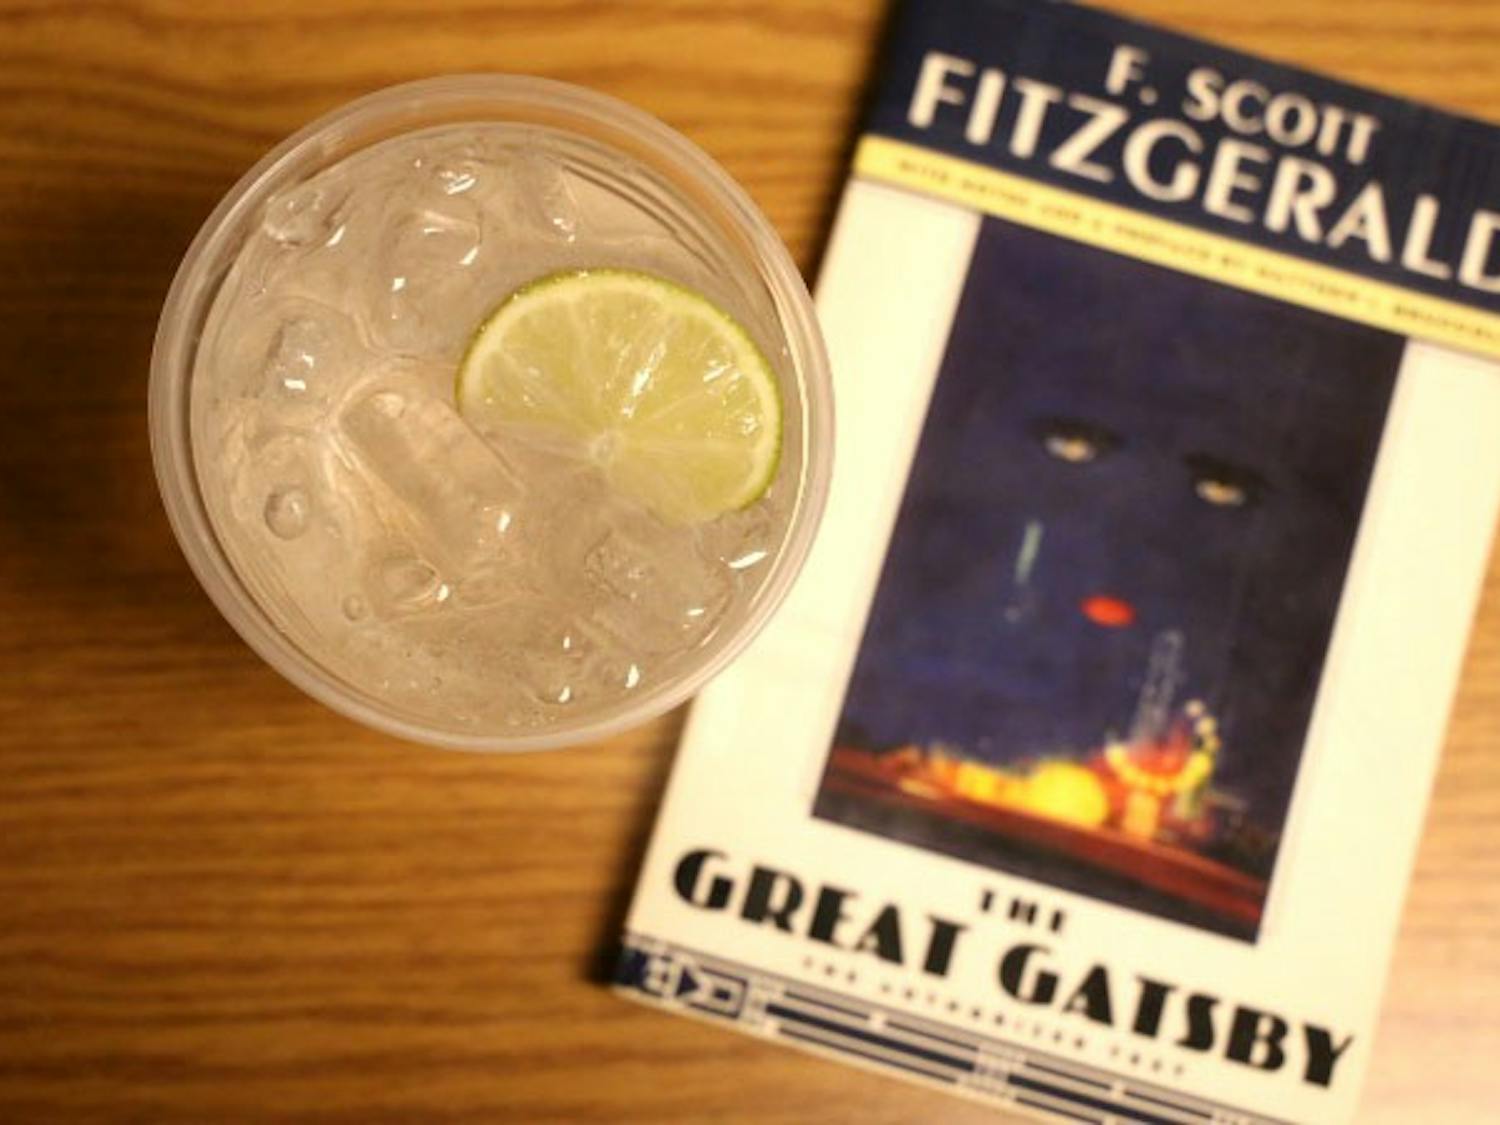 This week, columnist Carson Abernethy pairs The Great Gatsby by F. Scott Fitzgerald with a gin rickey.